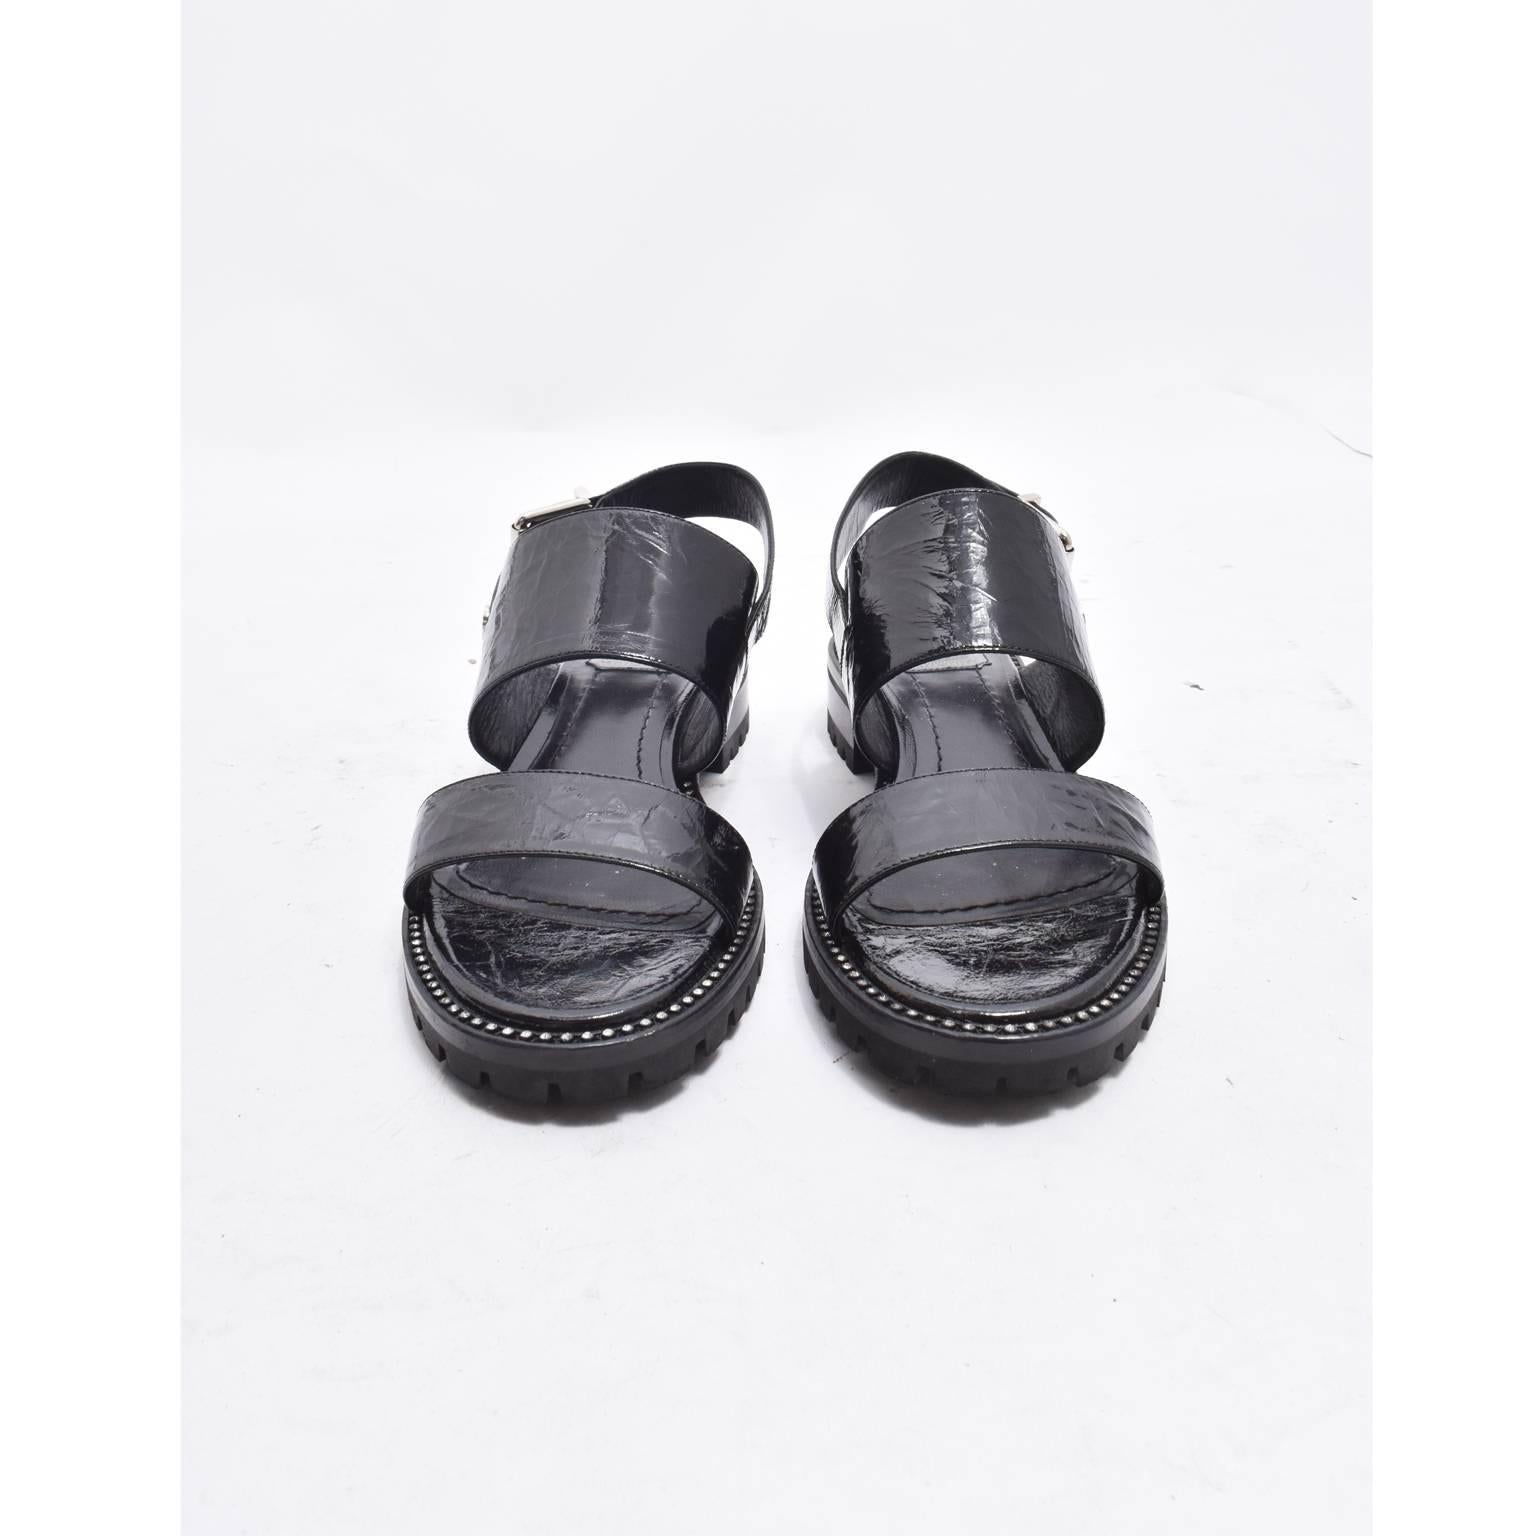 A pair of black leather sandals by Christian Dior. The sandals have two straps and a buckled strap at the back for fastening and a thick rubber sole with treads. They feature silver hardware details and crystal embellishments around the sole of the